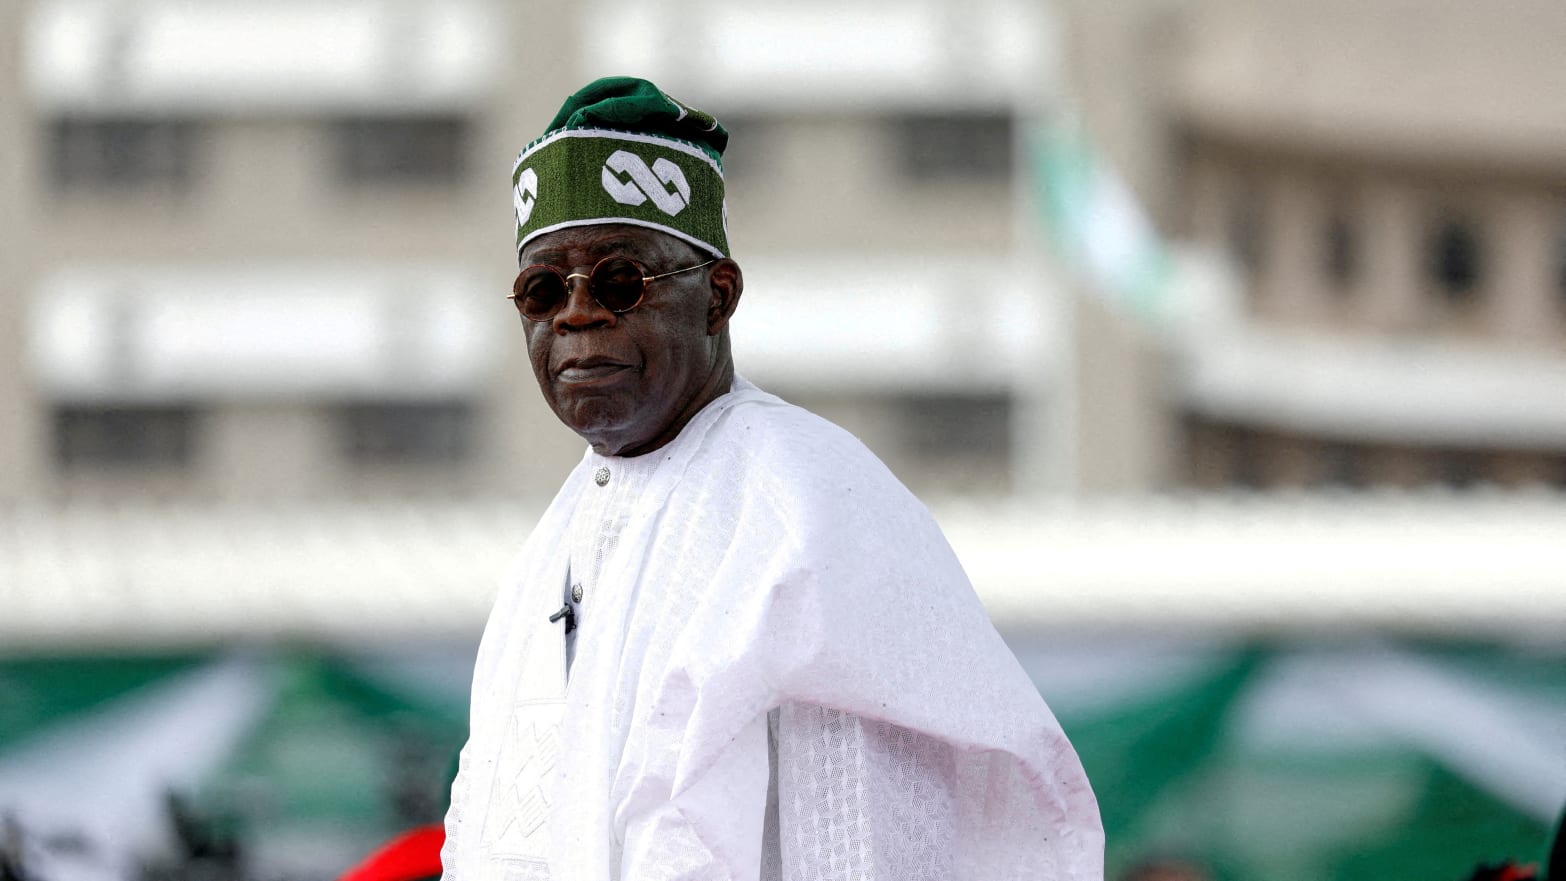 Nigeria's President Bola Tinubu looks on after his swearing-in ceremony in Abuja, Nigeria May 29, 2023. 